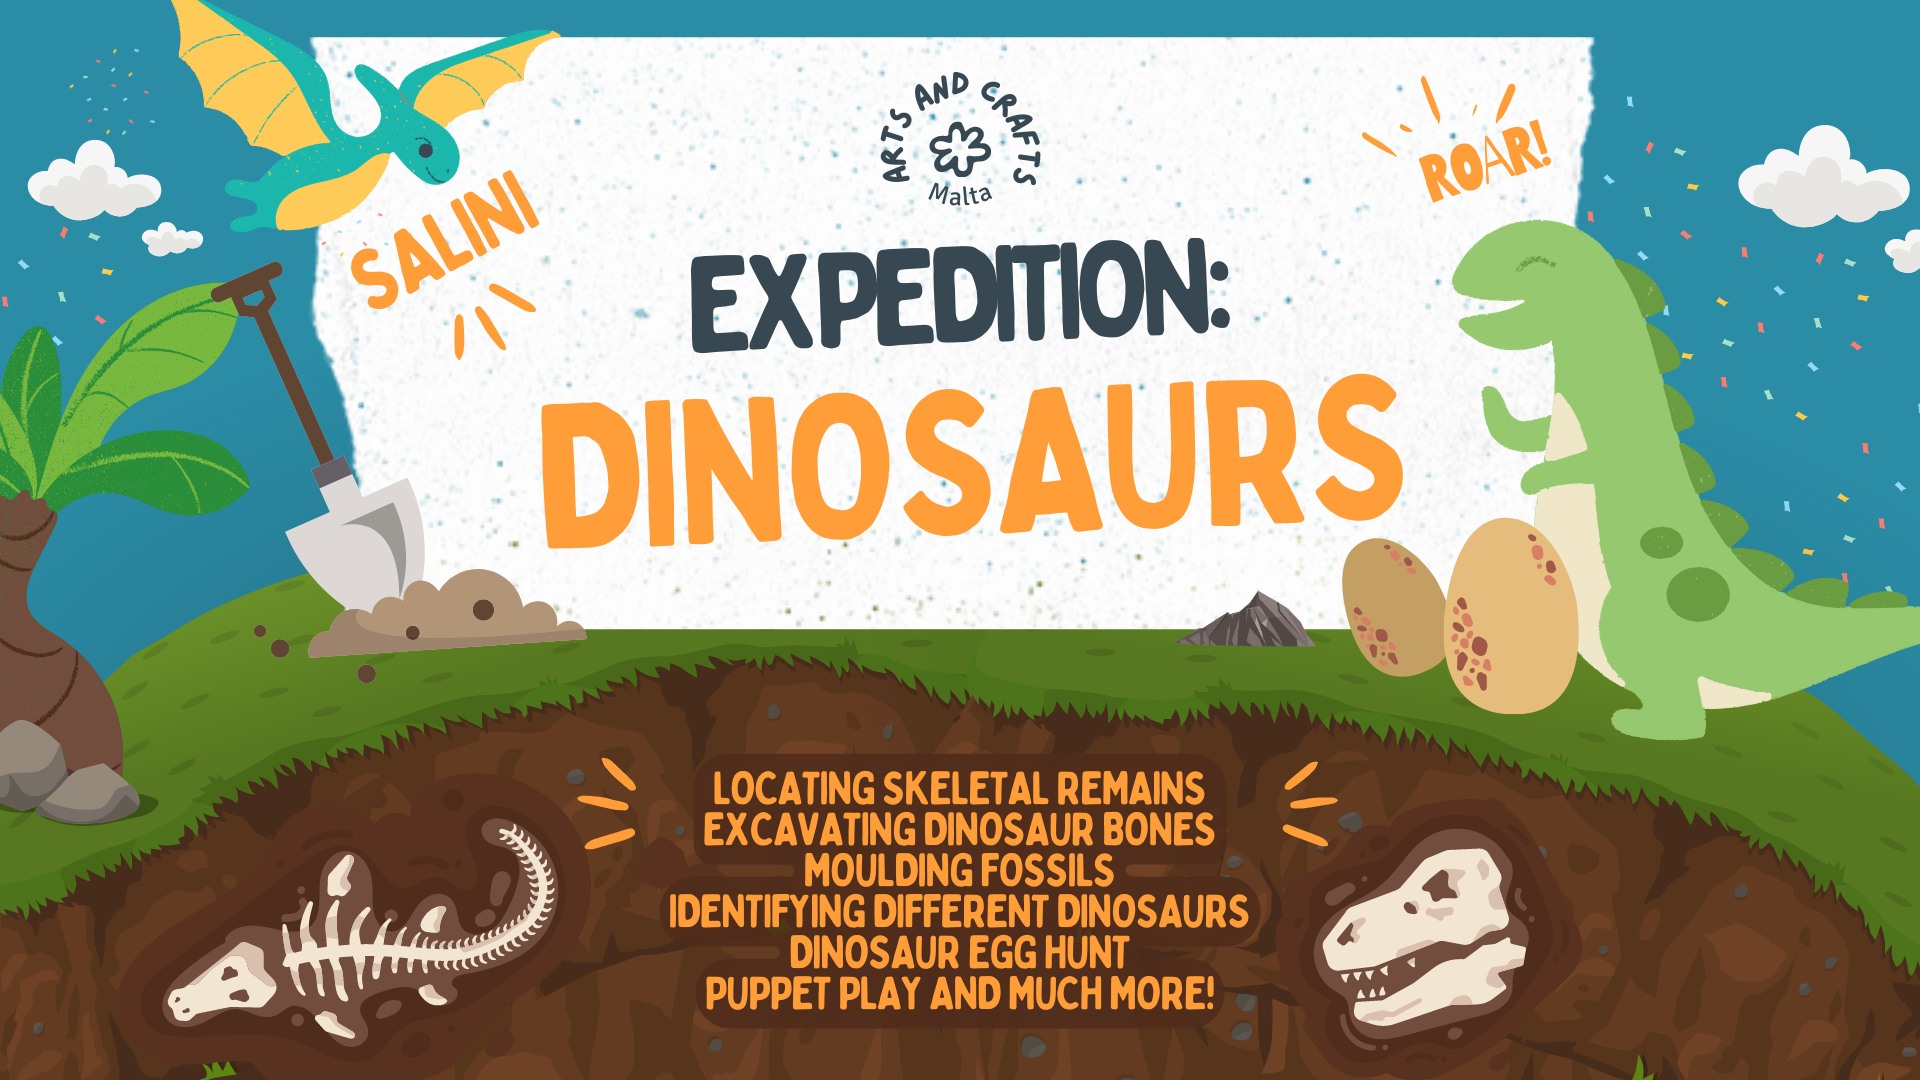 Expedition: Dinosaurs!